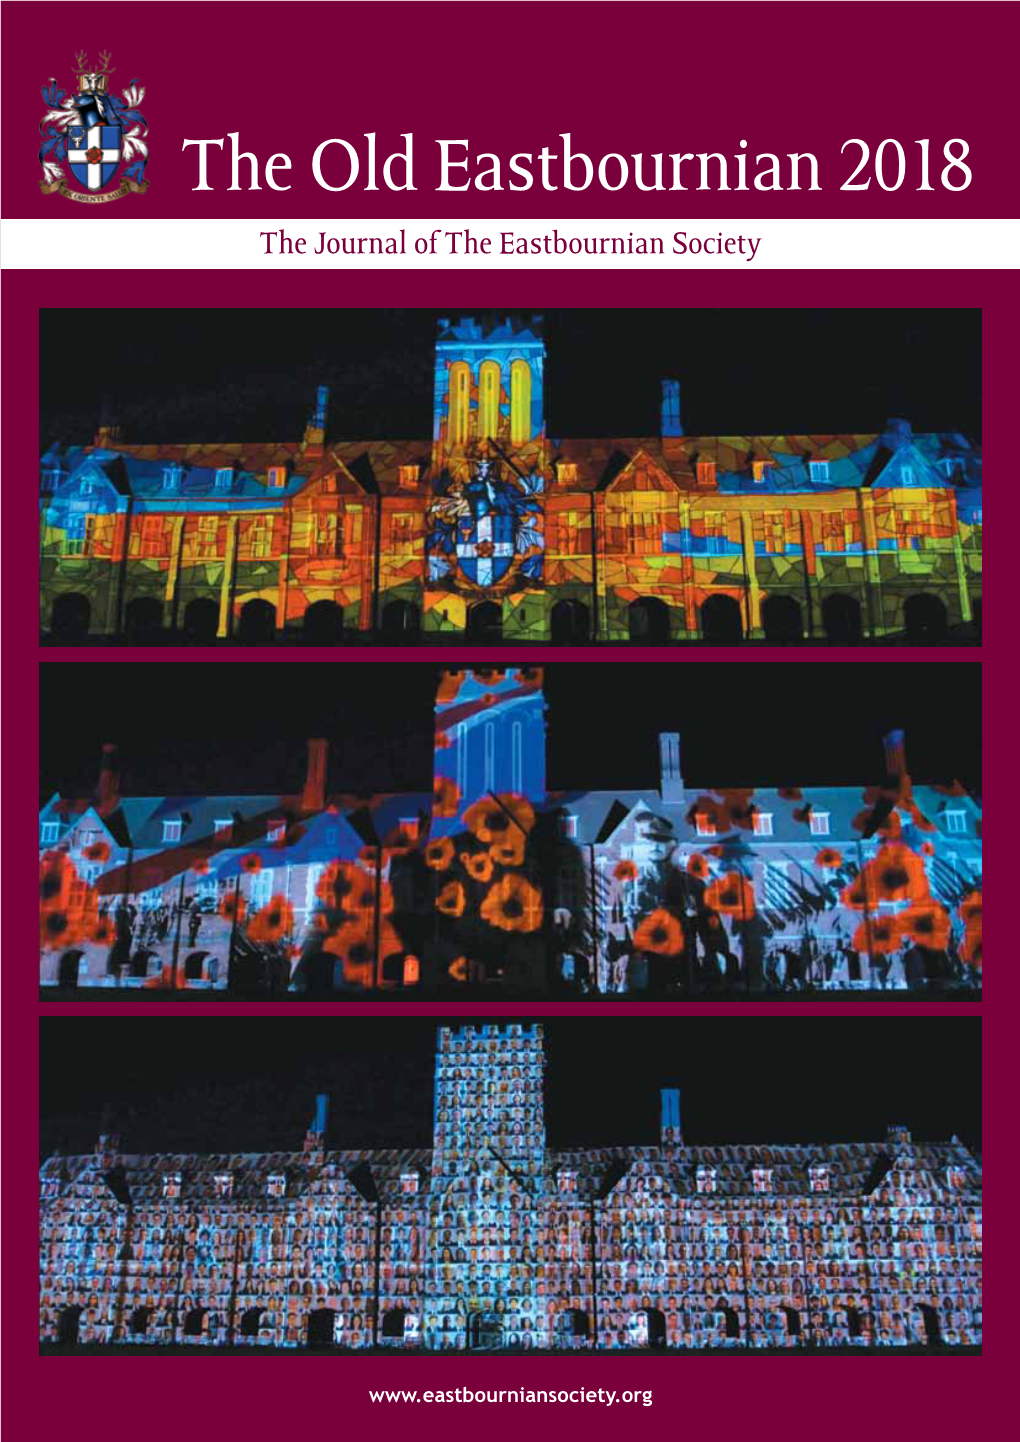 The Old Eastbournian 2018 the Journal of the Eastbournian Society